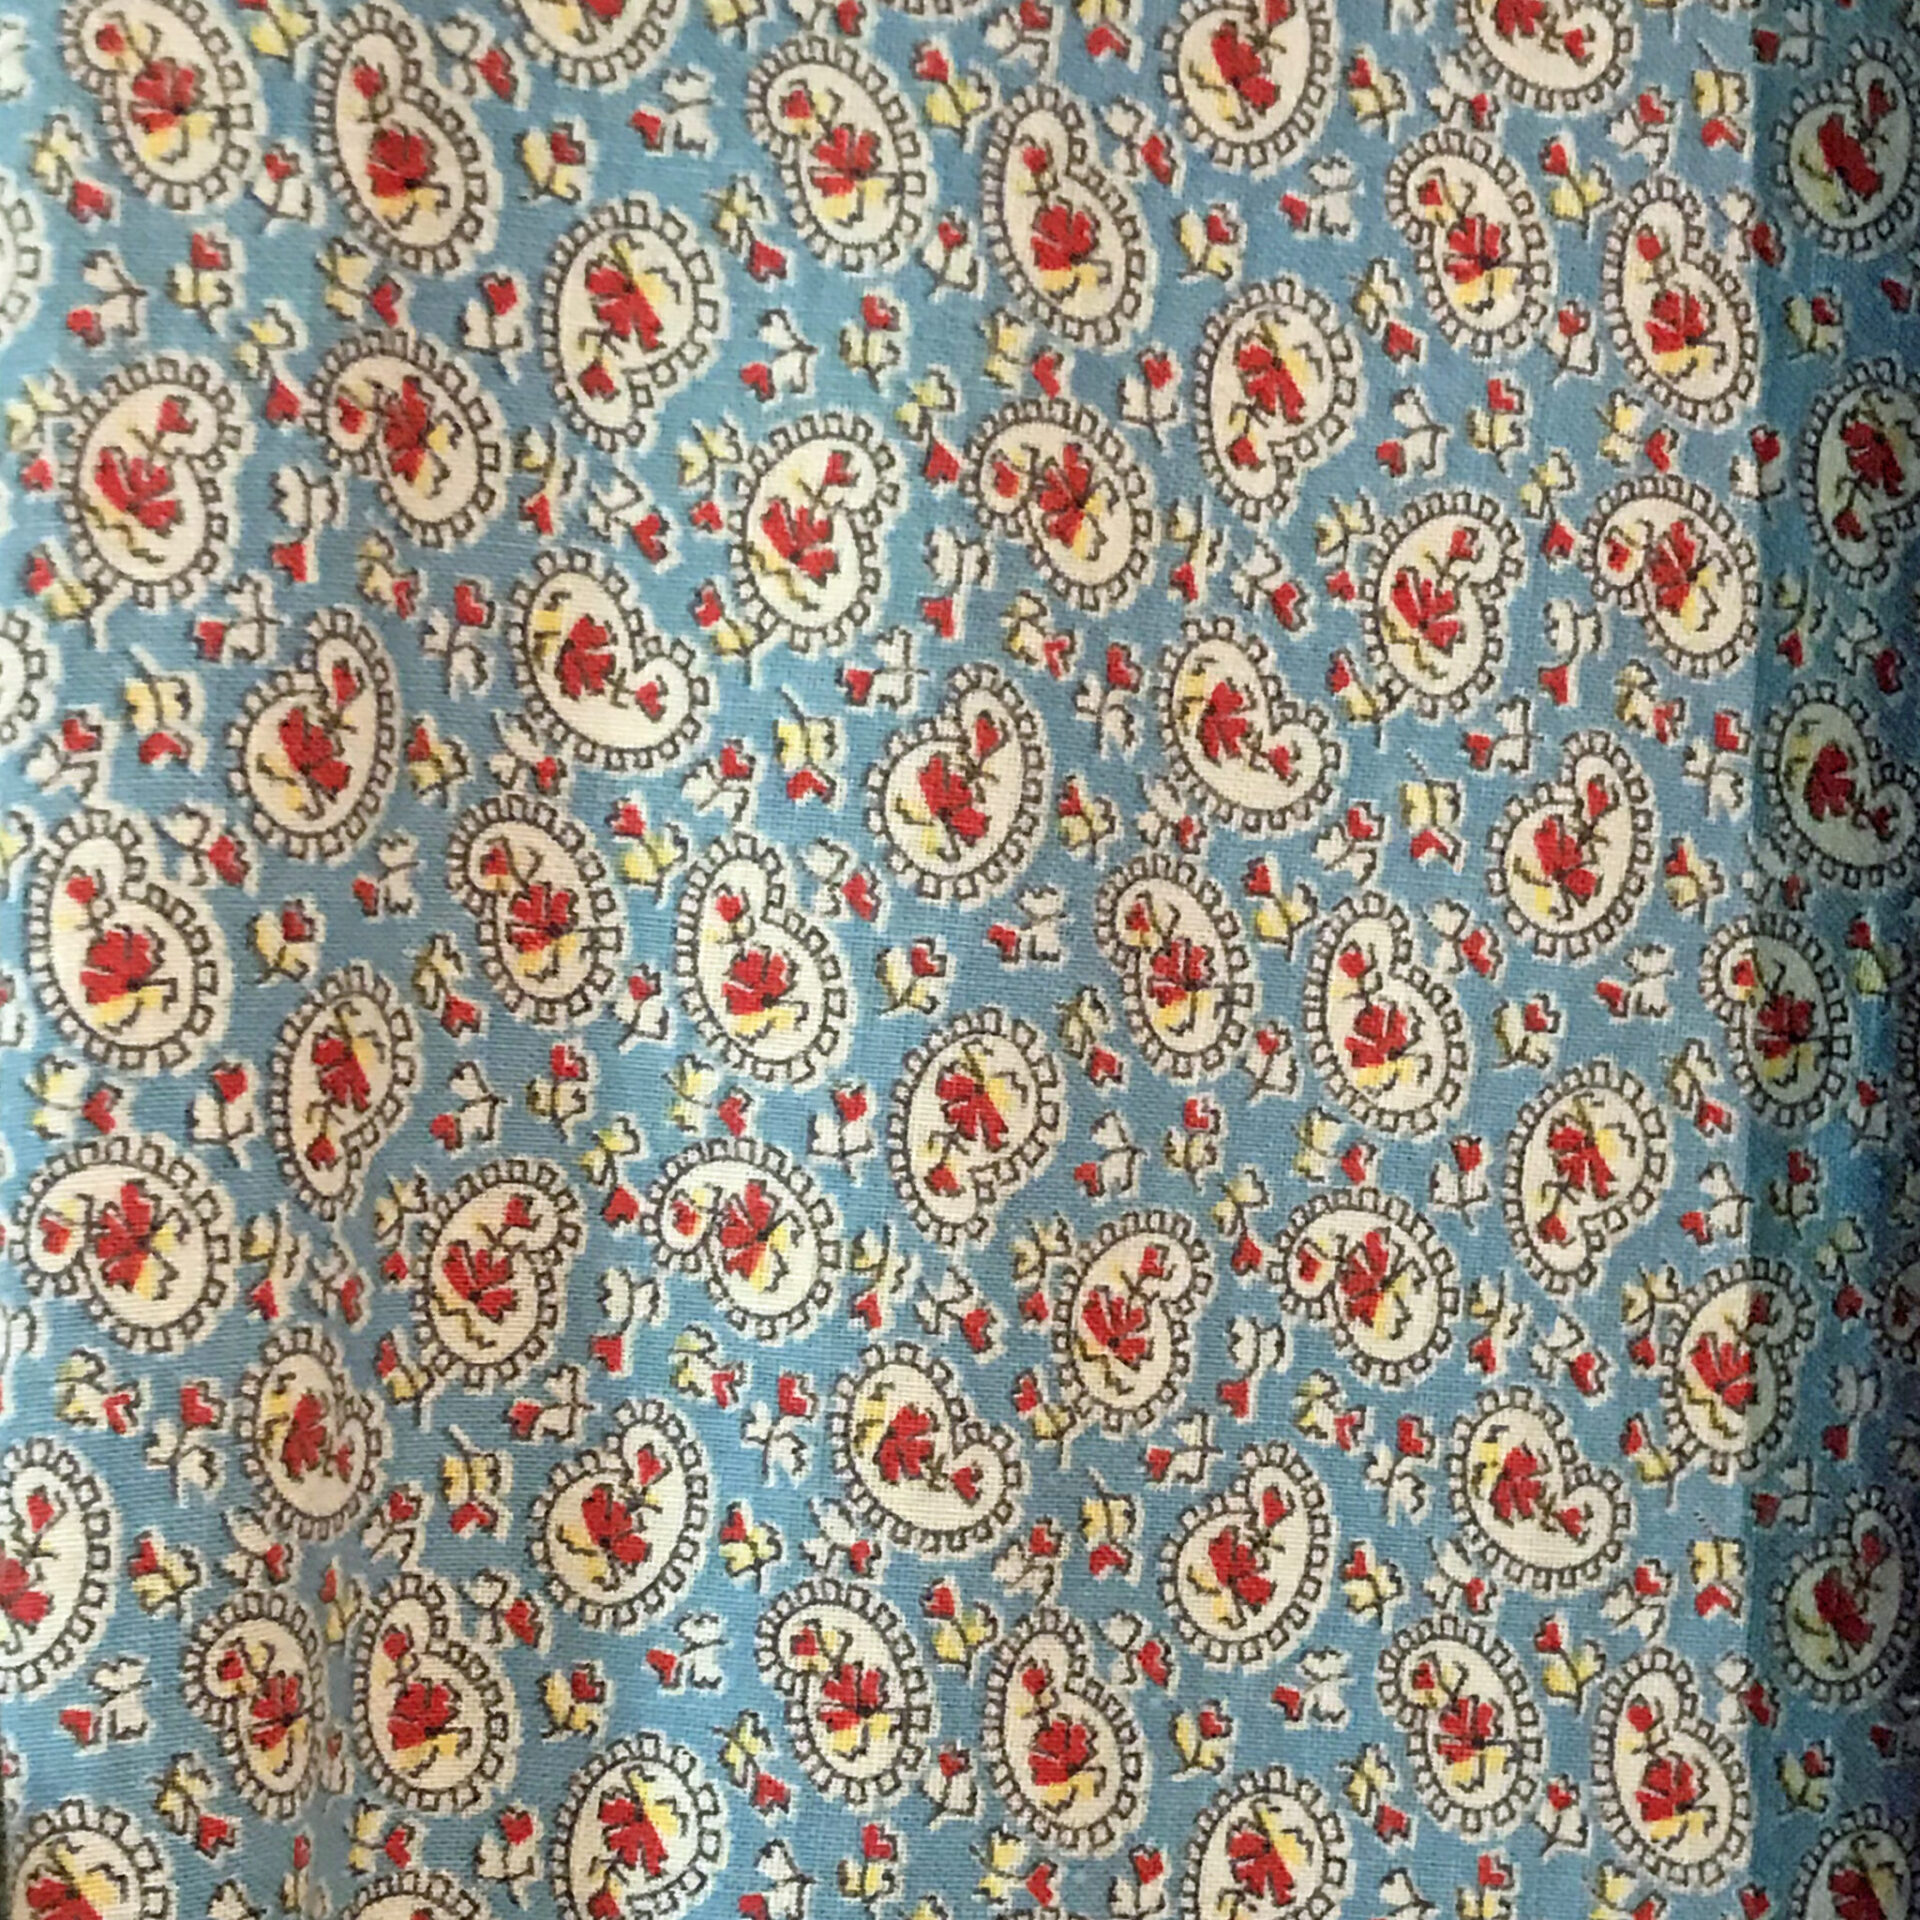 A blue flour sack print with red flowers.